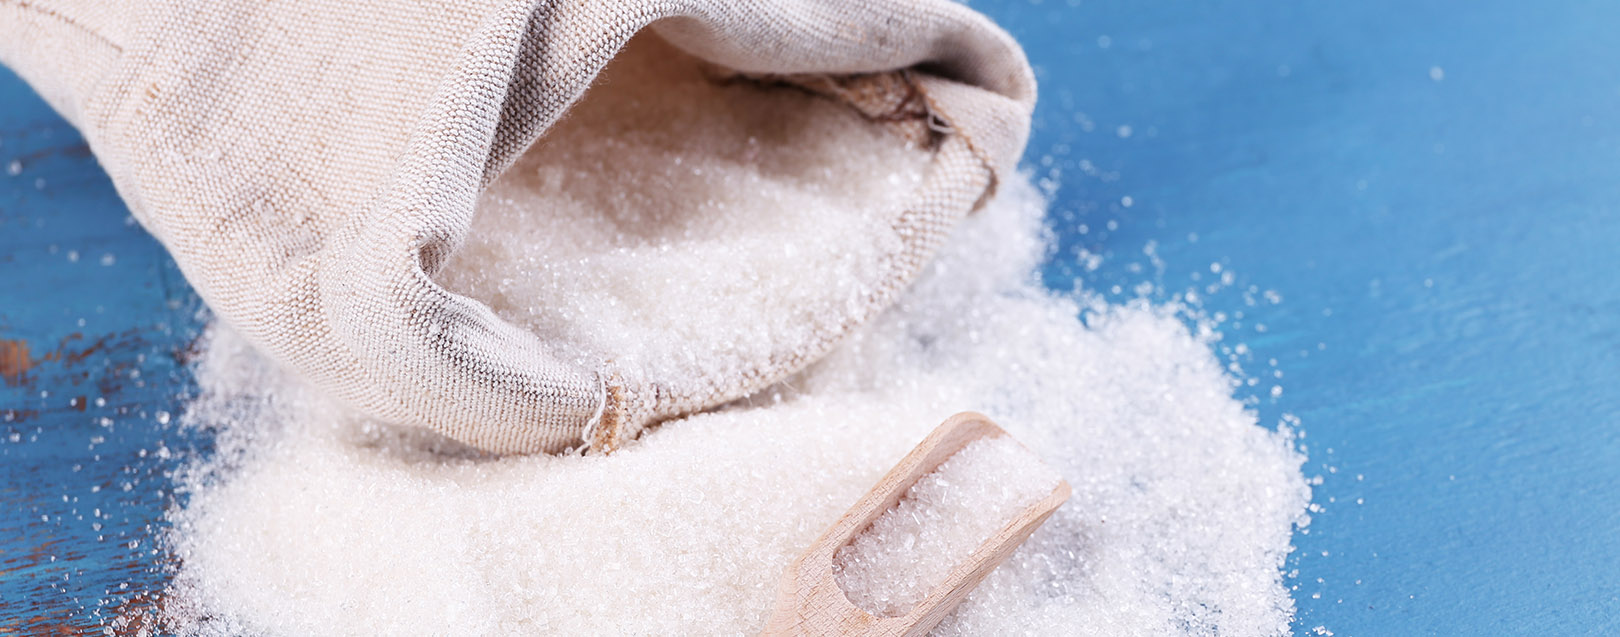 Sugar prices likely to go up due to supply shortage